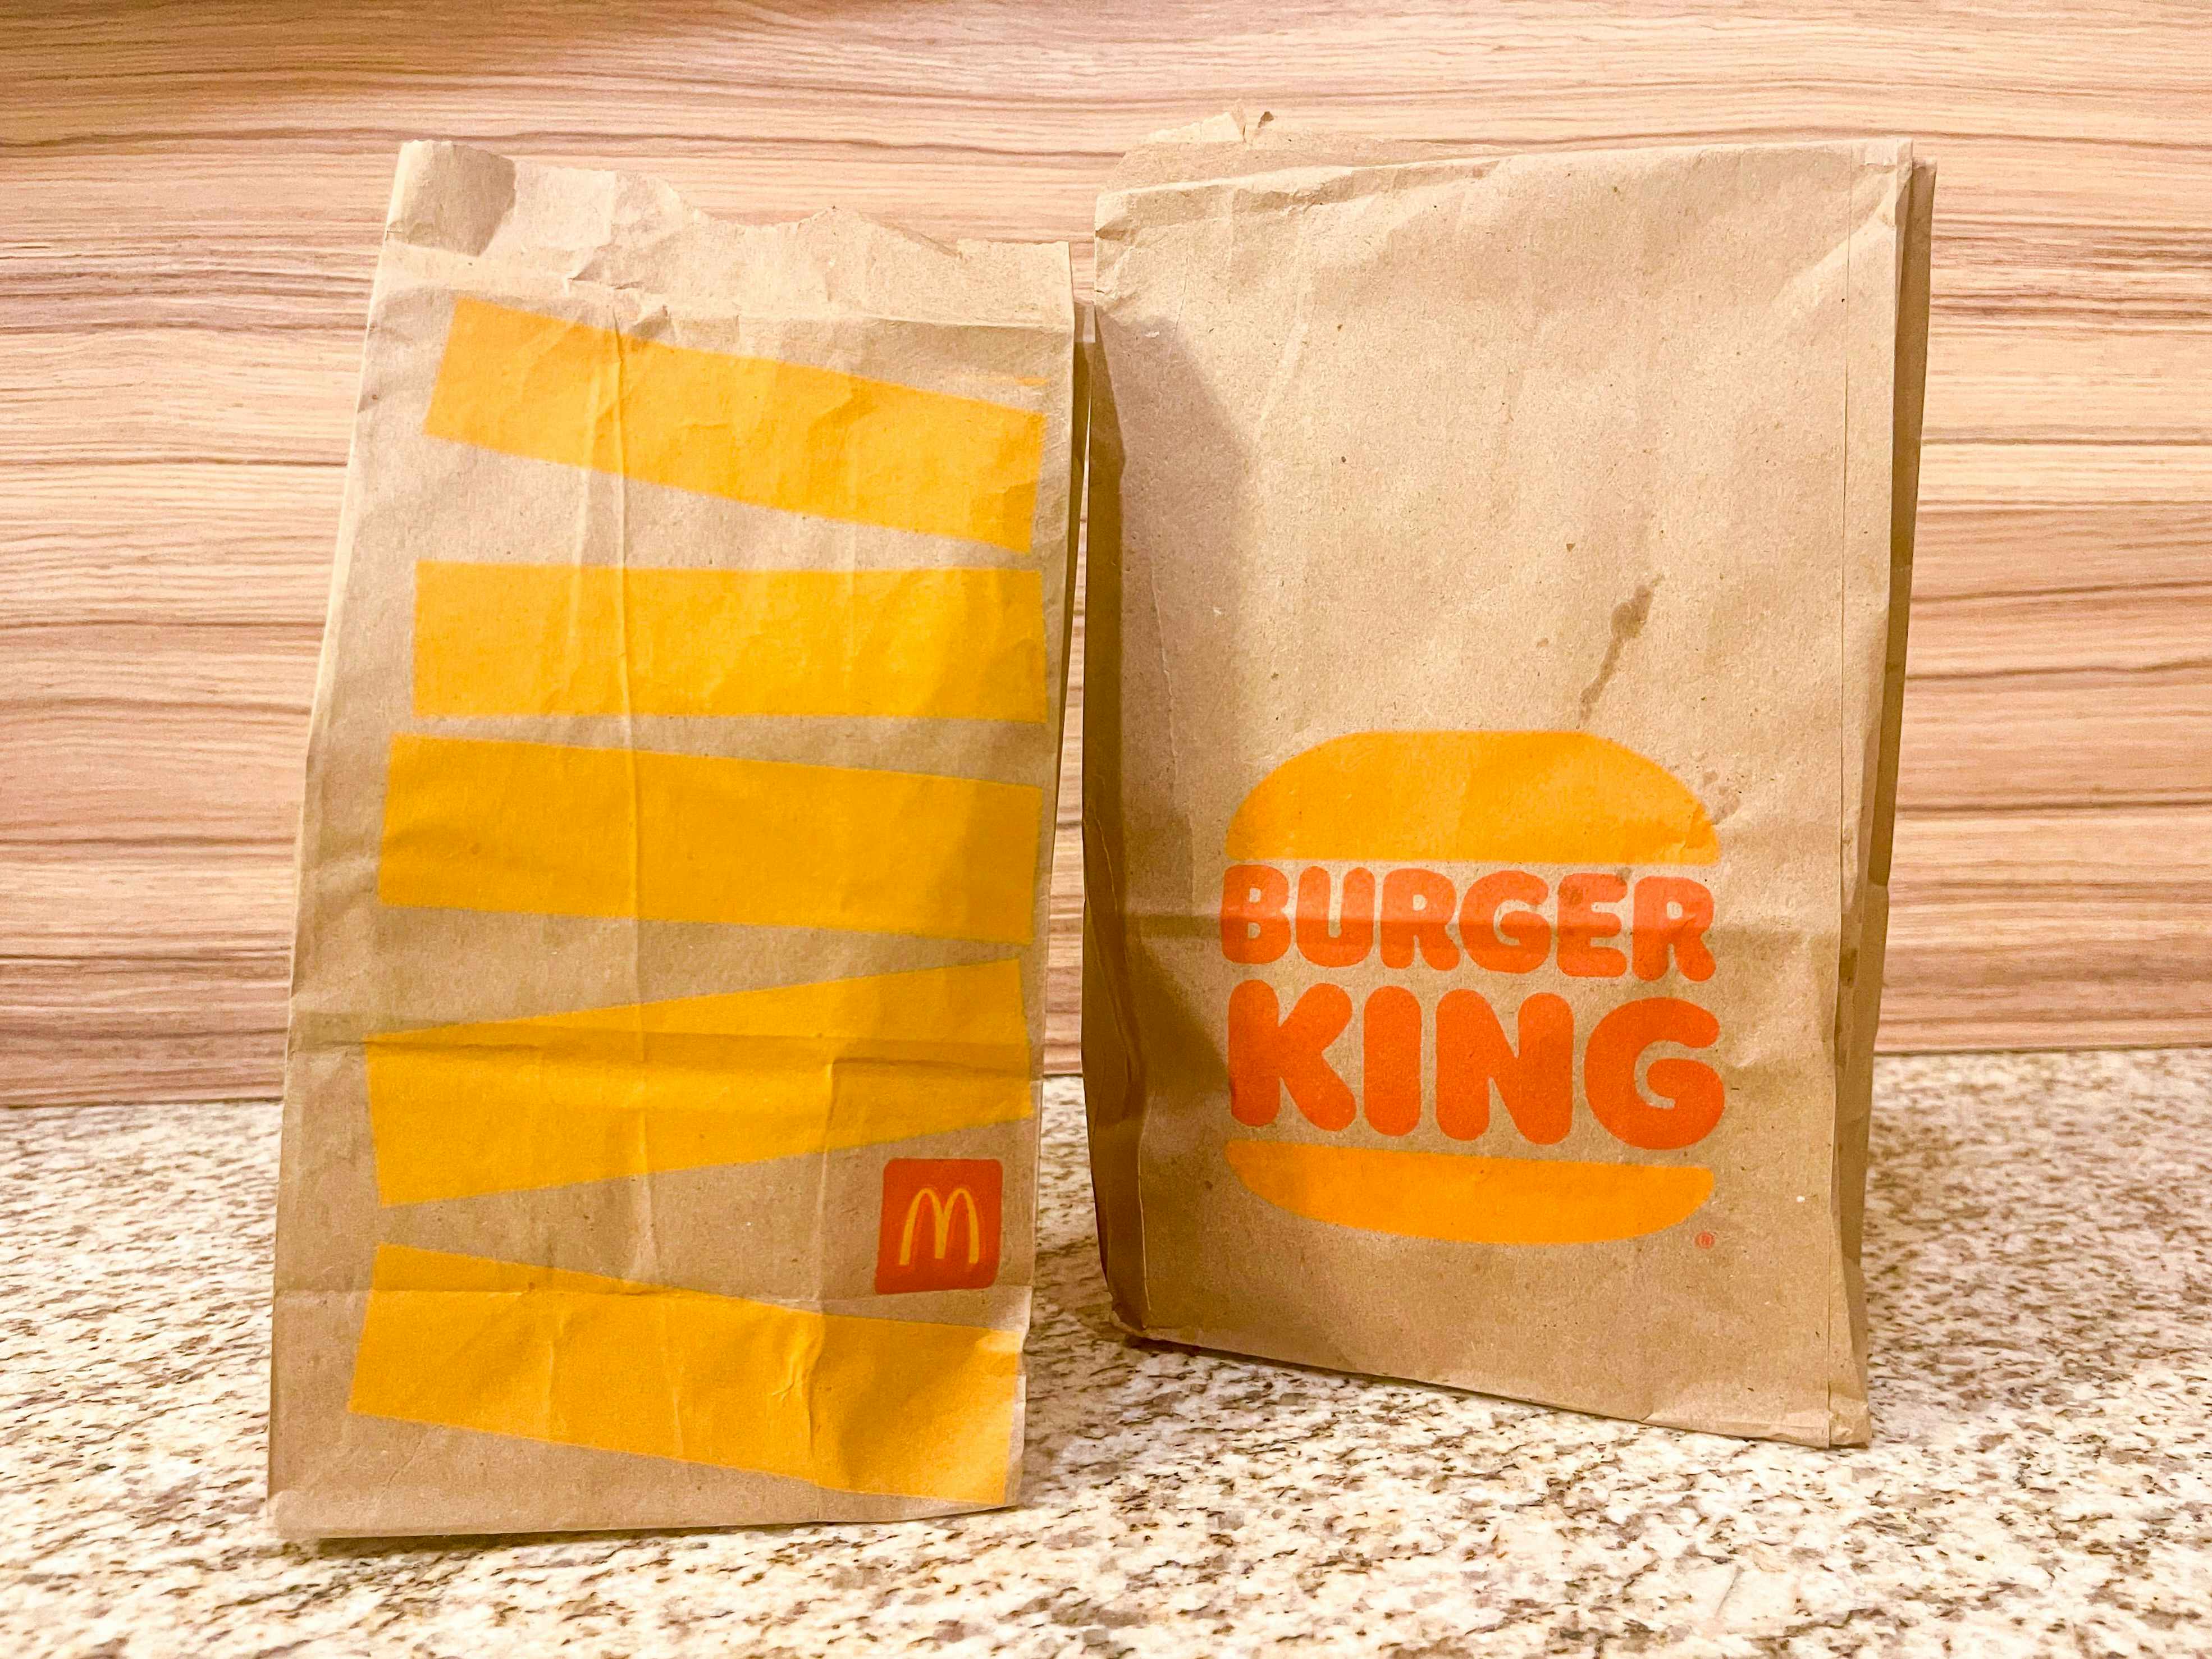 mcdonalds and burger king takeout bags